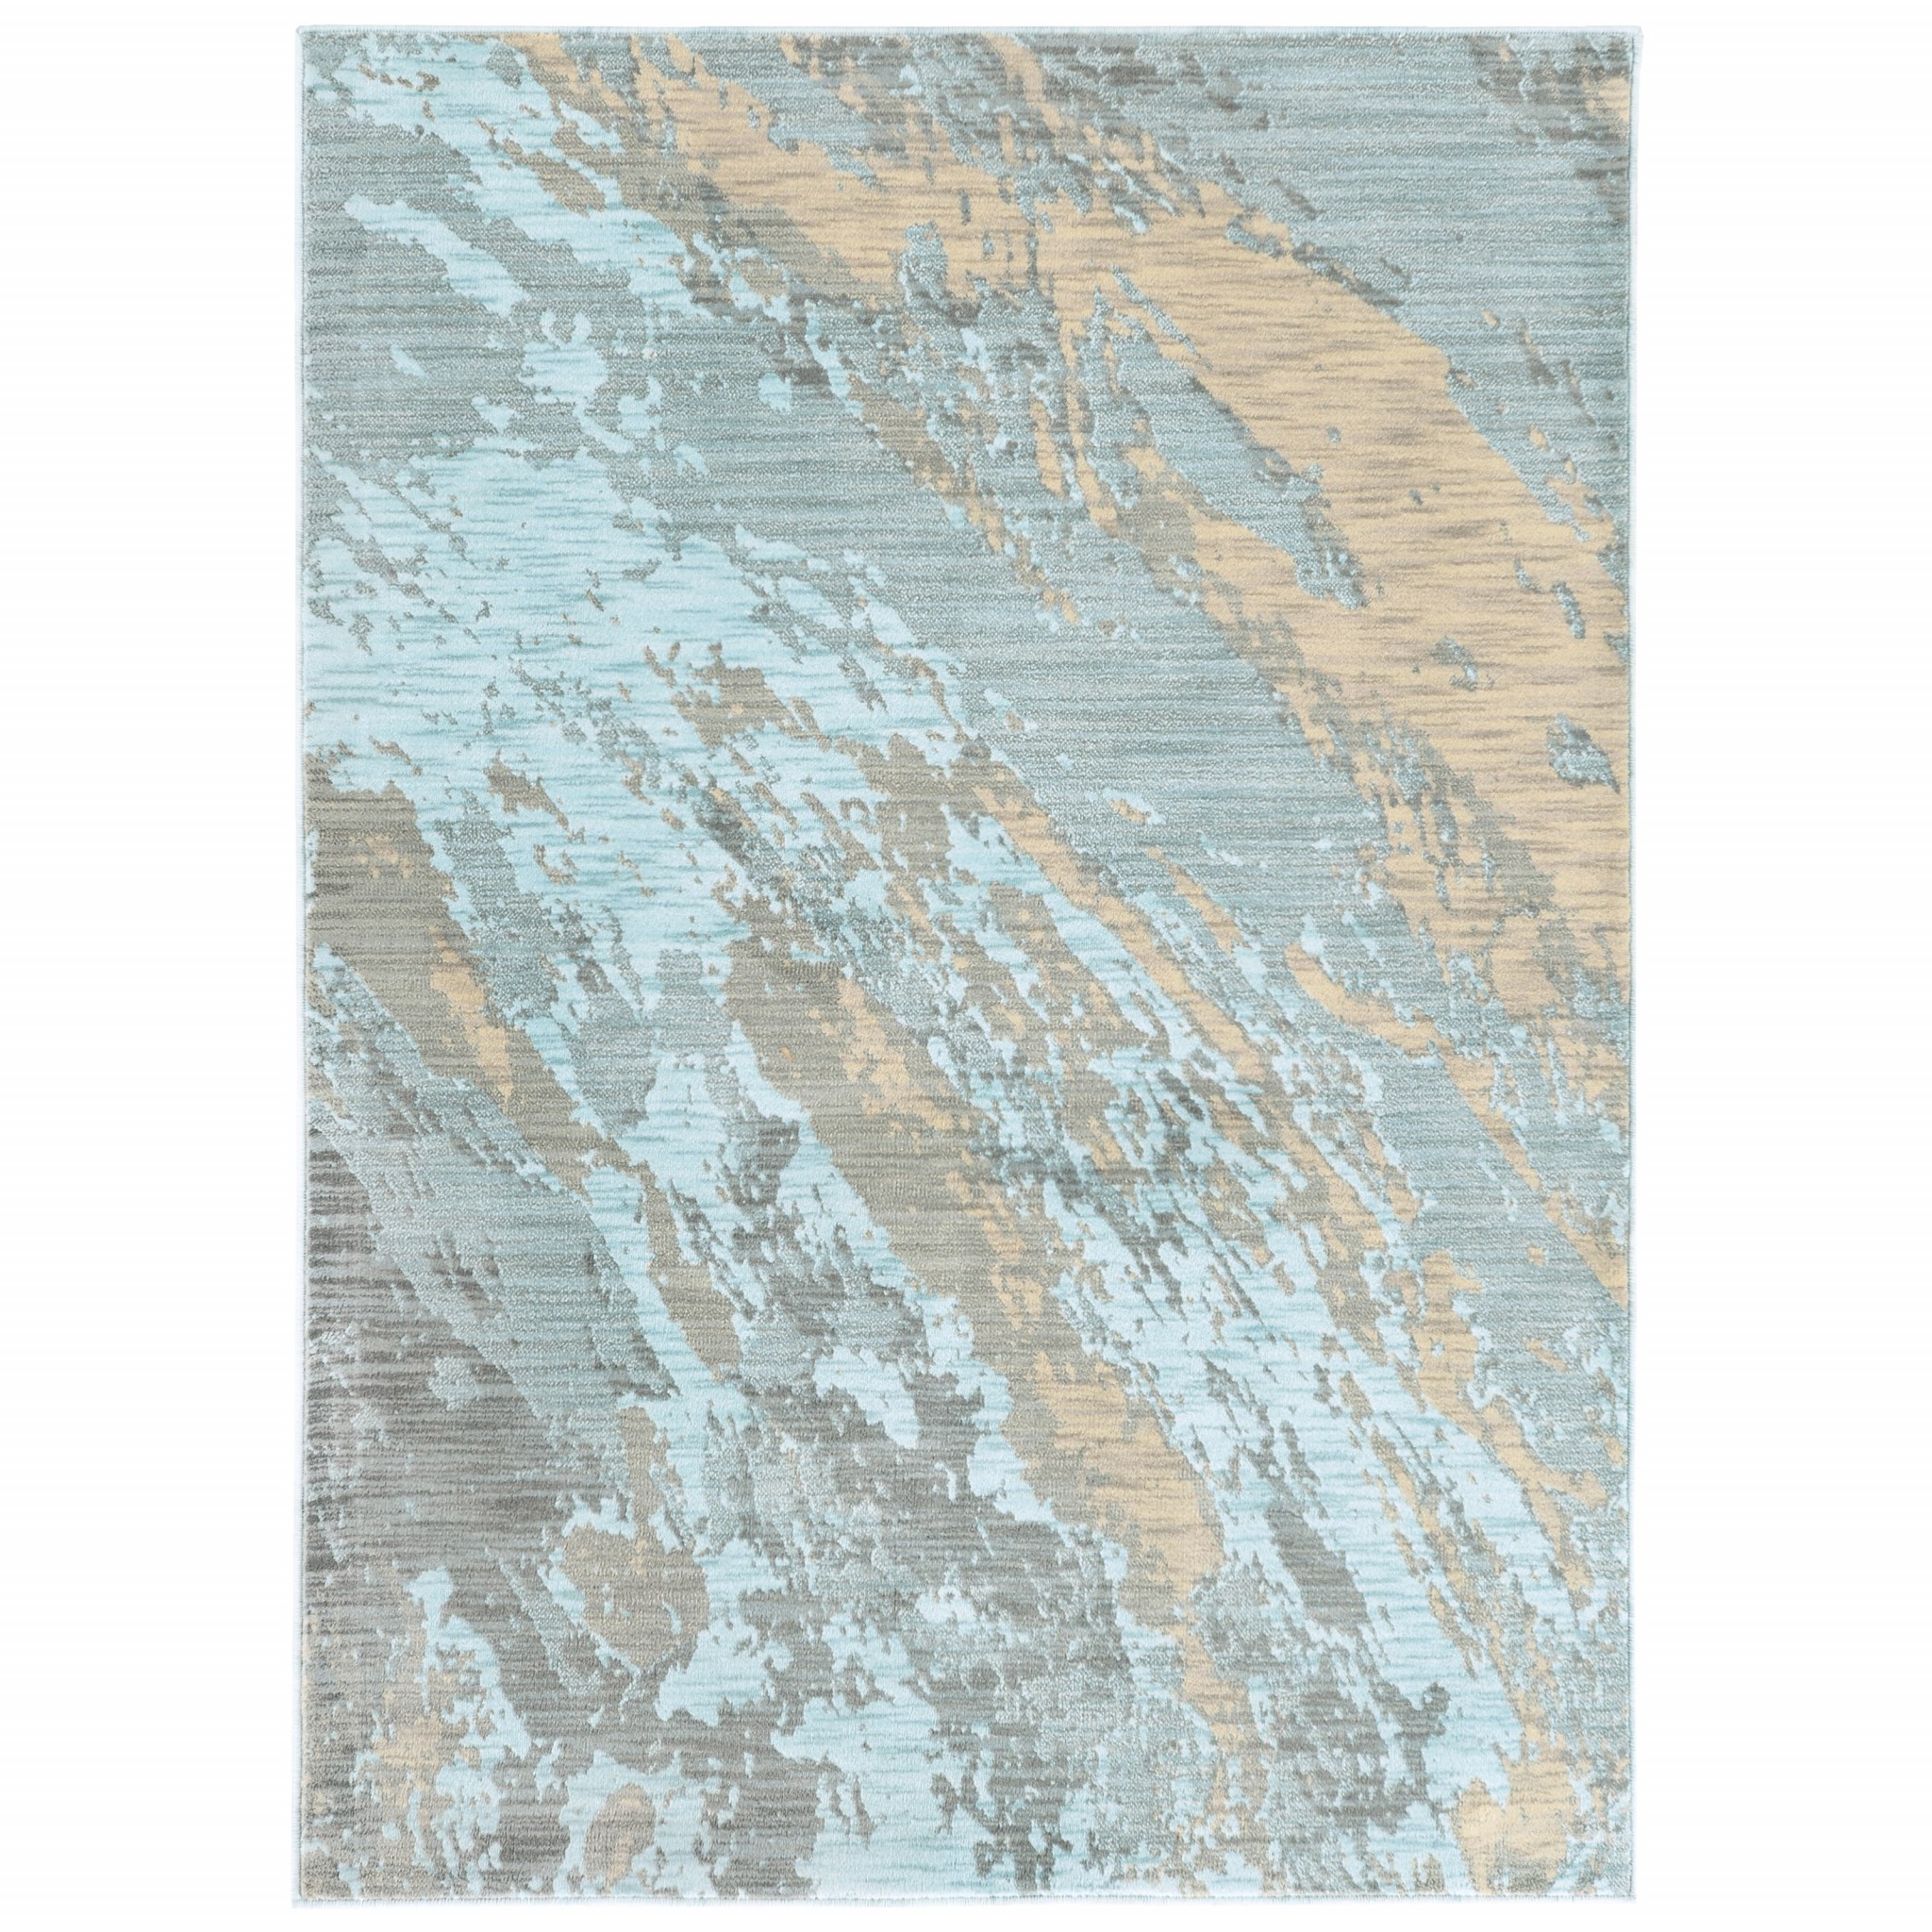 10’X13’ Blue And Gray Abstract Impasto Area Rug-388821-1